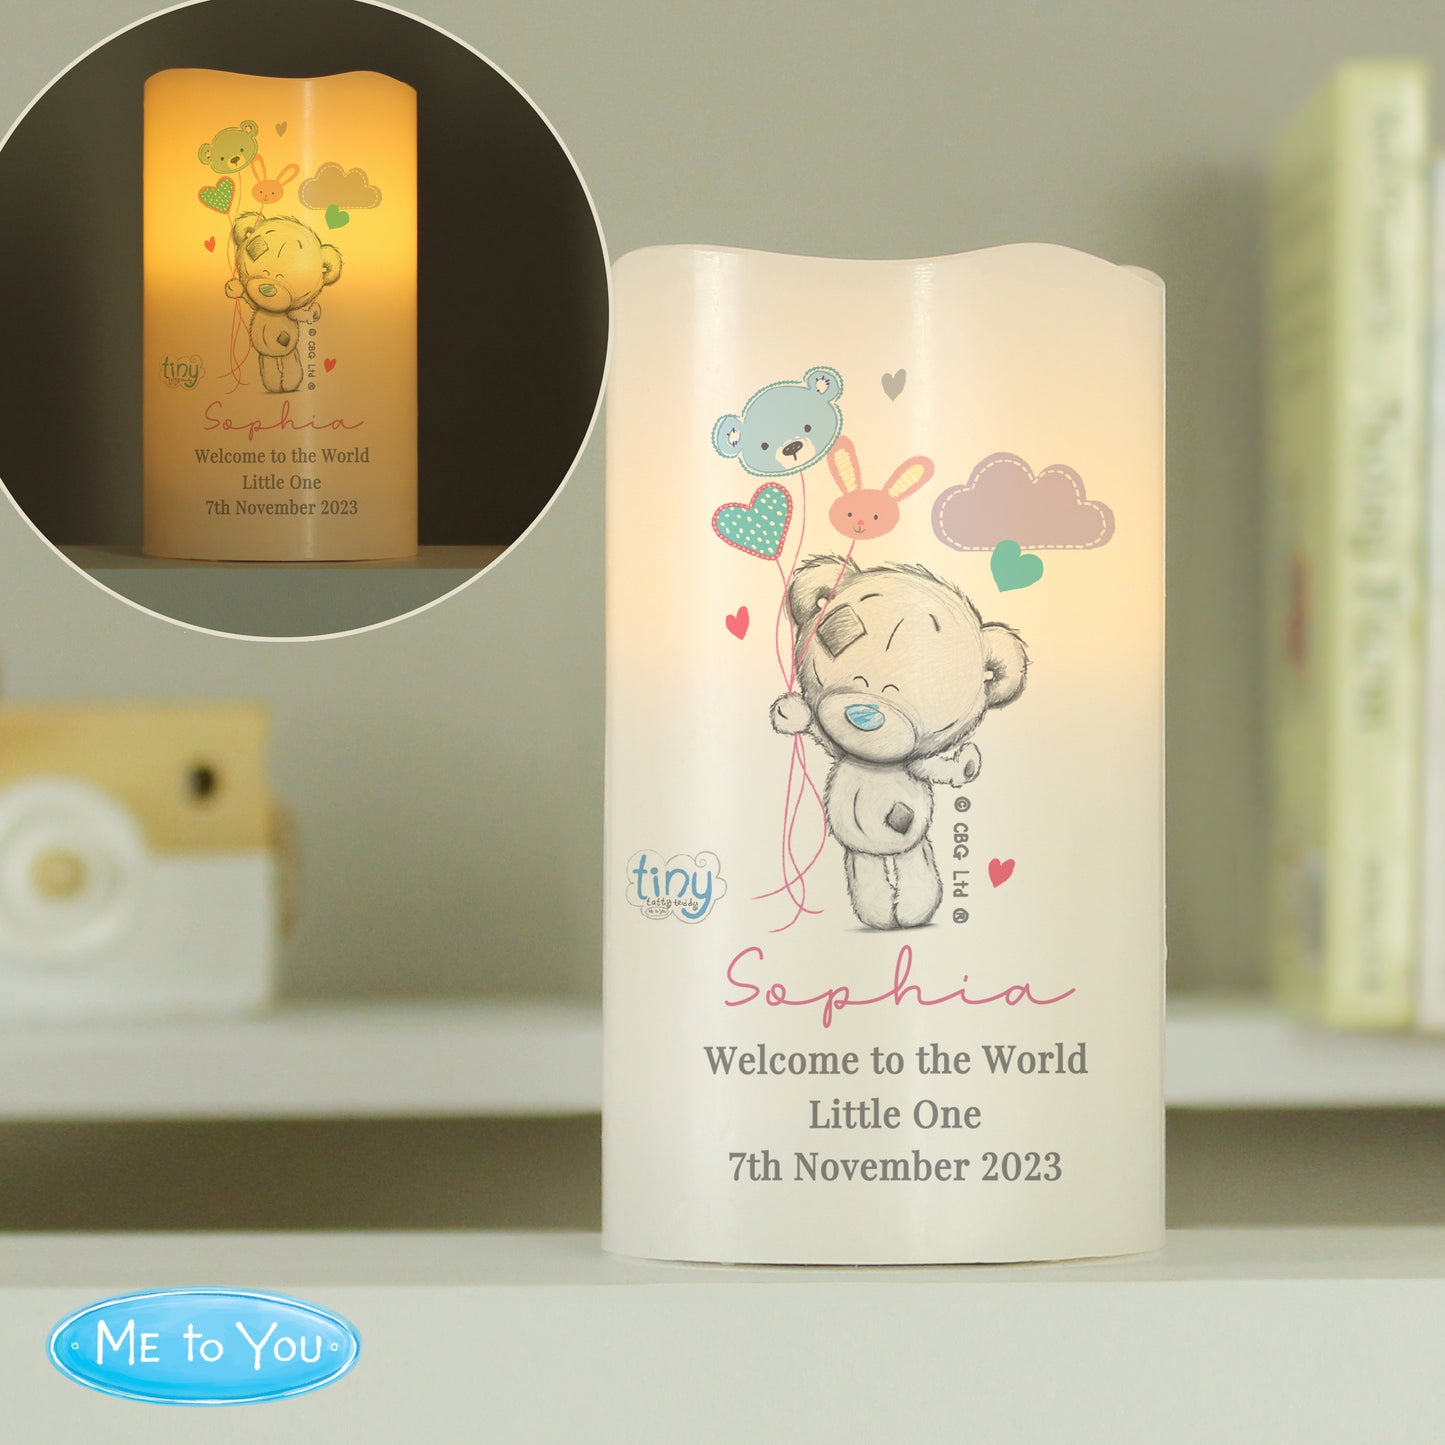 Personalised Tiny Tatty Teddy Dream Big Pink Nightlight LED Candle - Personalise It!